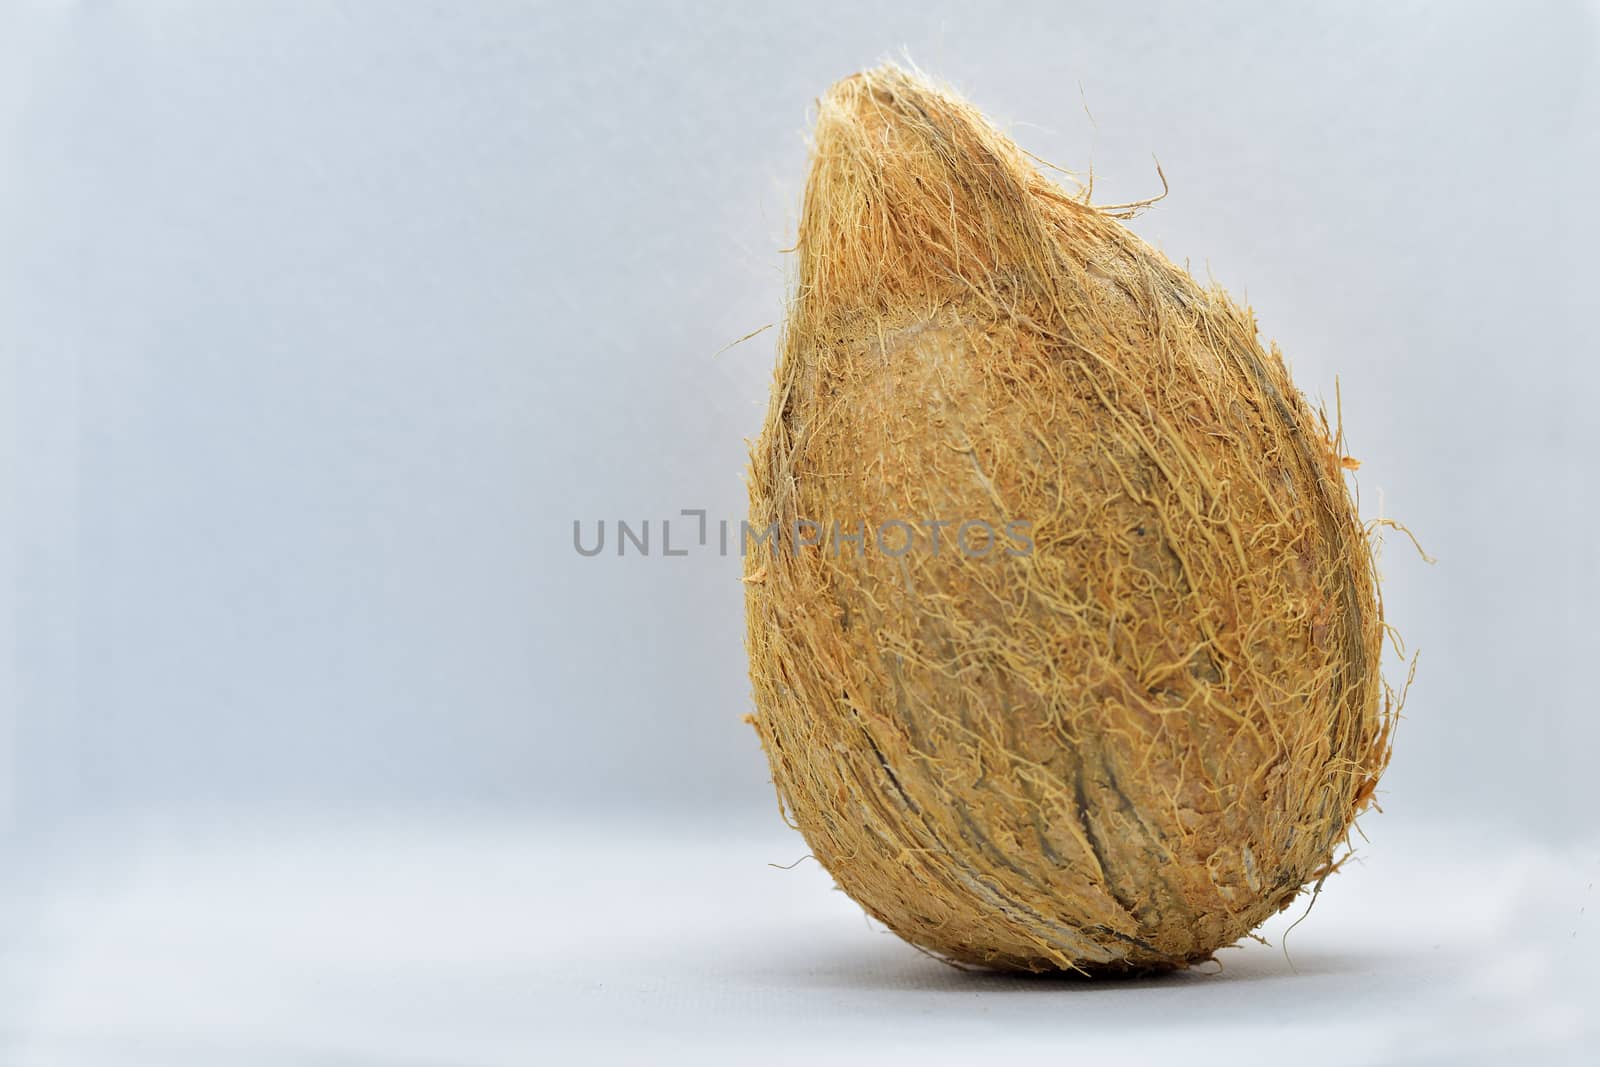 Coconut is the fruit of the coconut palm (Cocos nucifera). It's used for its water, milk, oil, and tasty meat. Coconuts have been grown in tropical regions